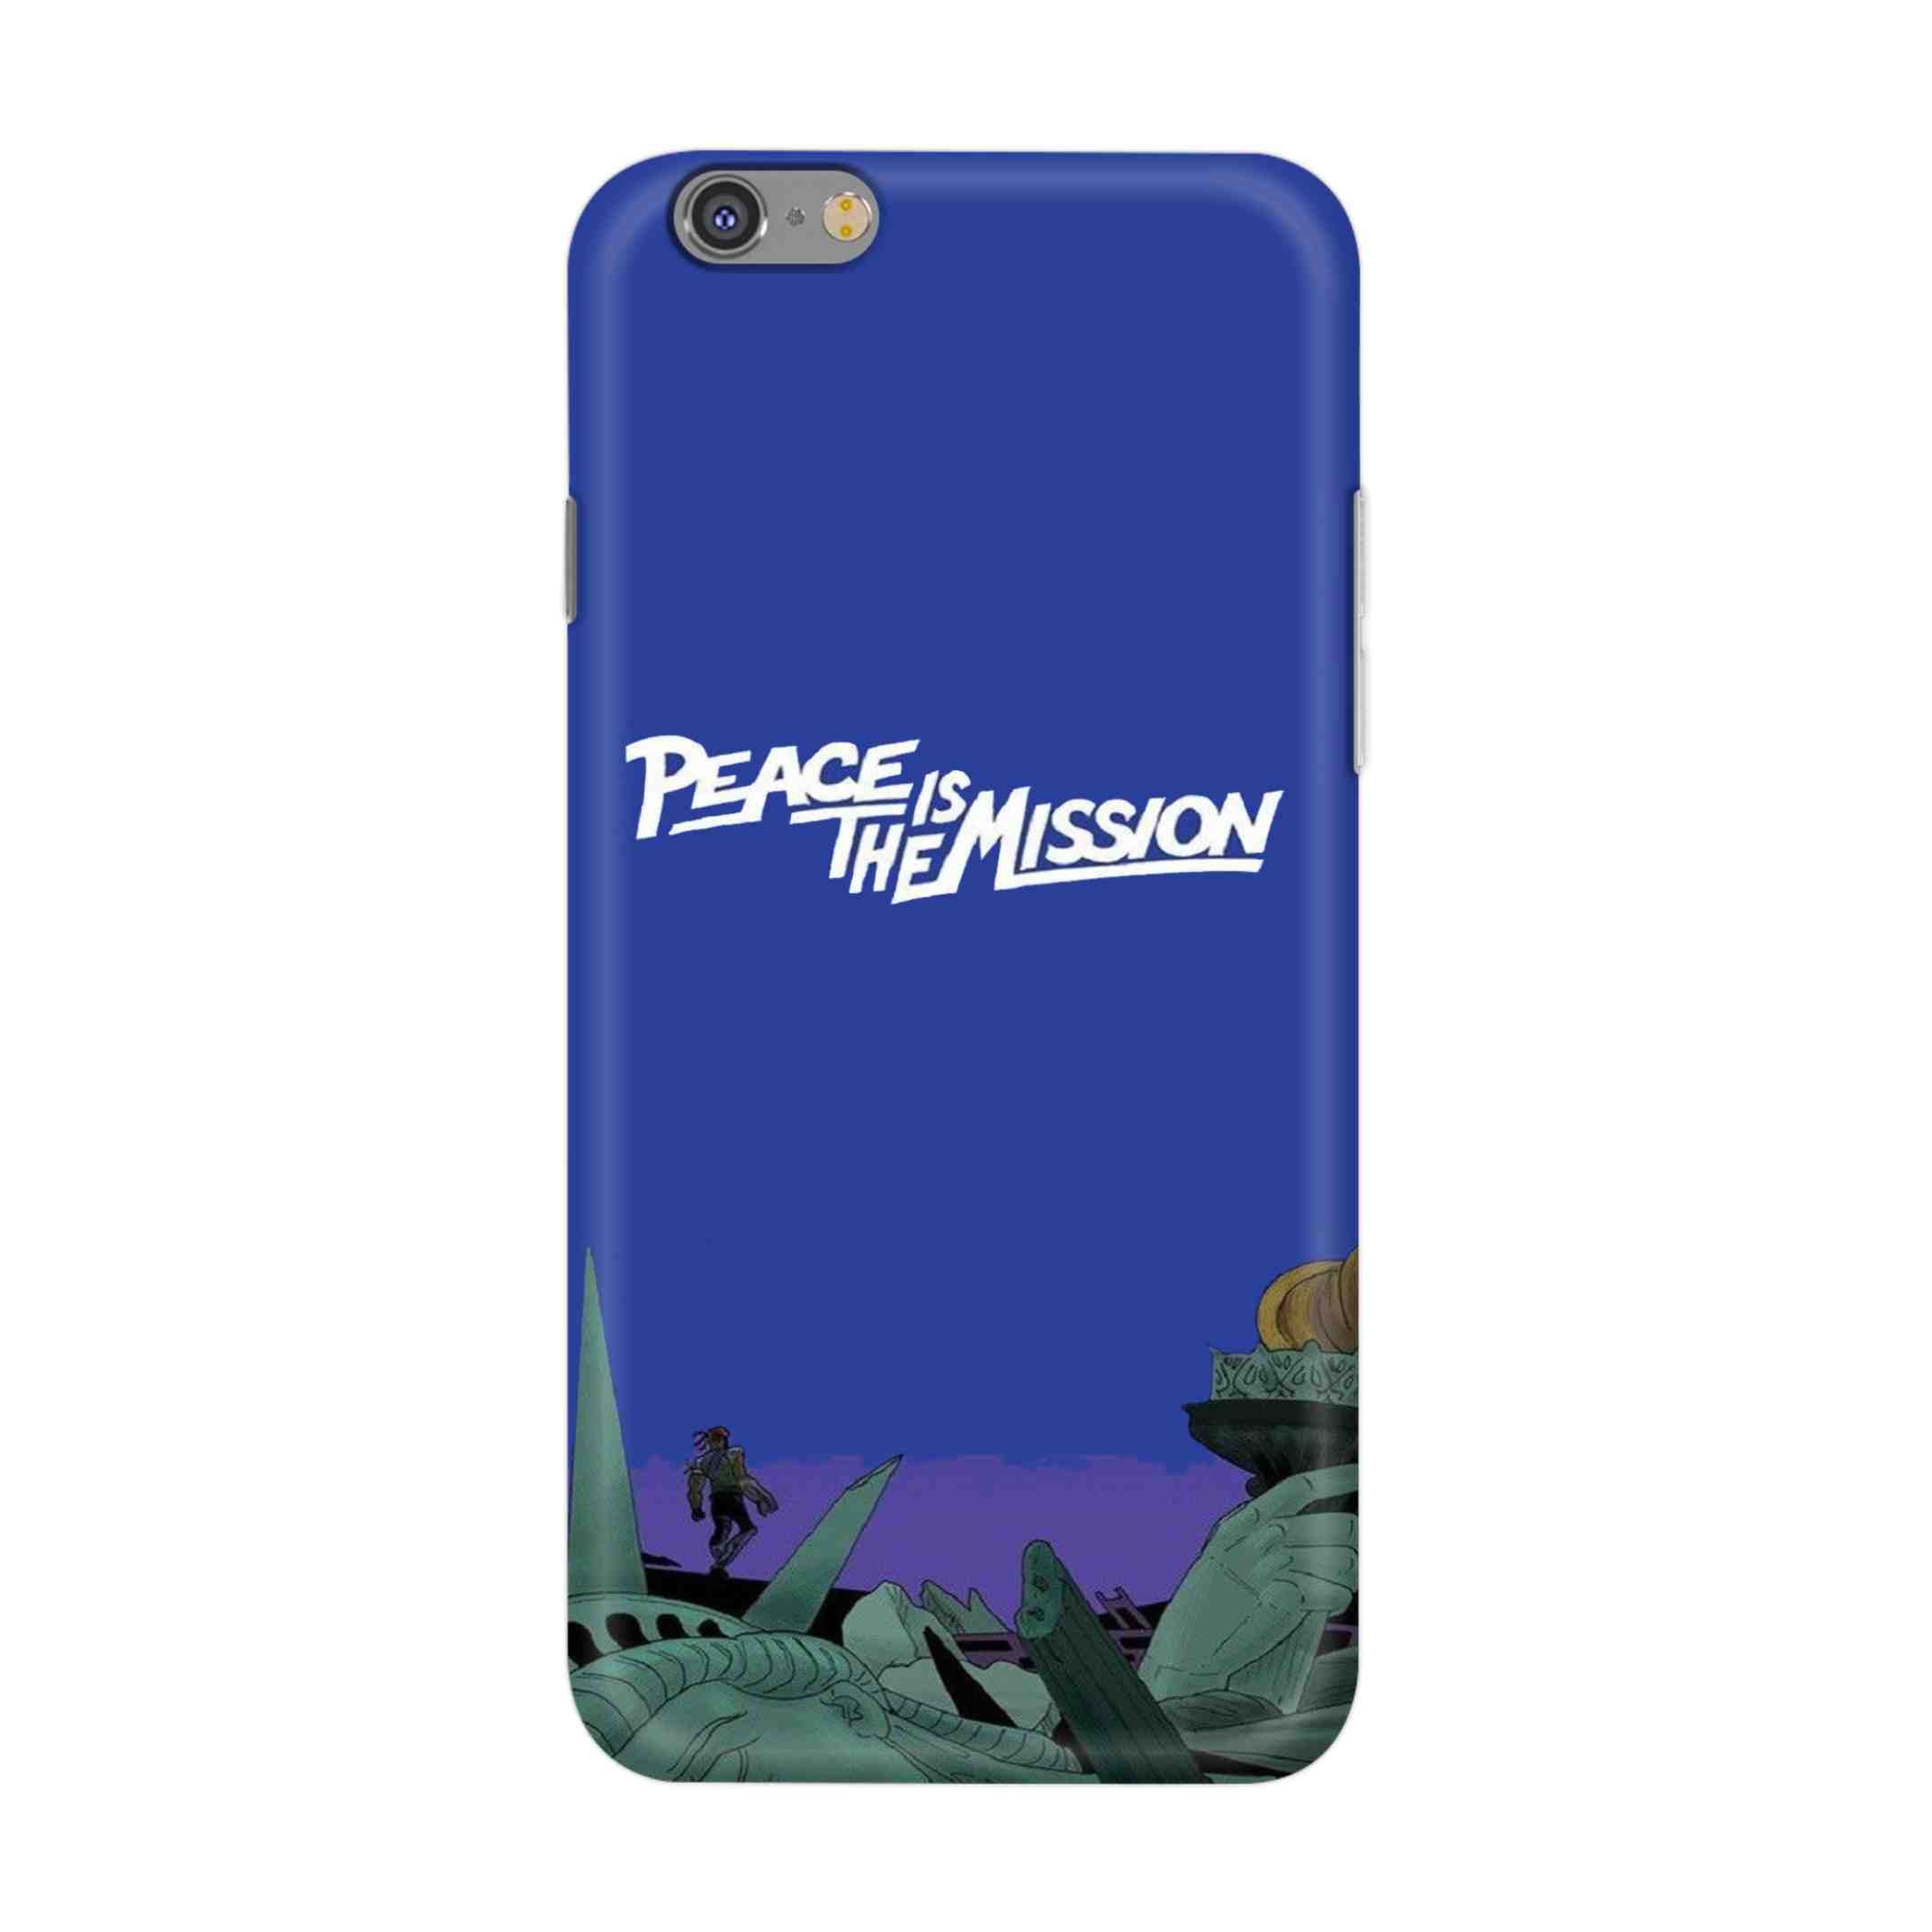 Buy Peace Is The Misson Hard Back Mobile Phone Case/Cover For iPhone 6 Plus / 6s Plus Online